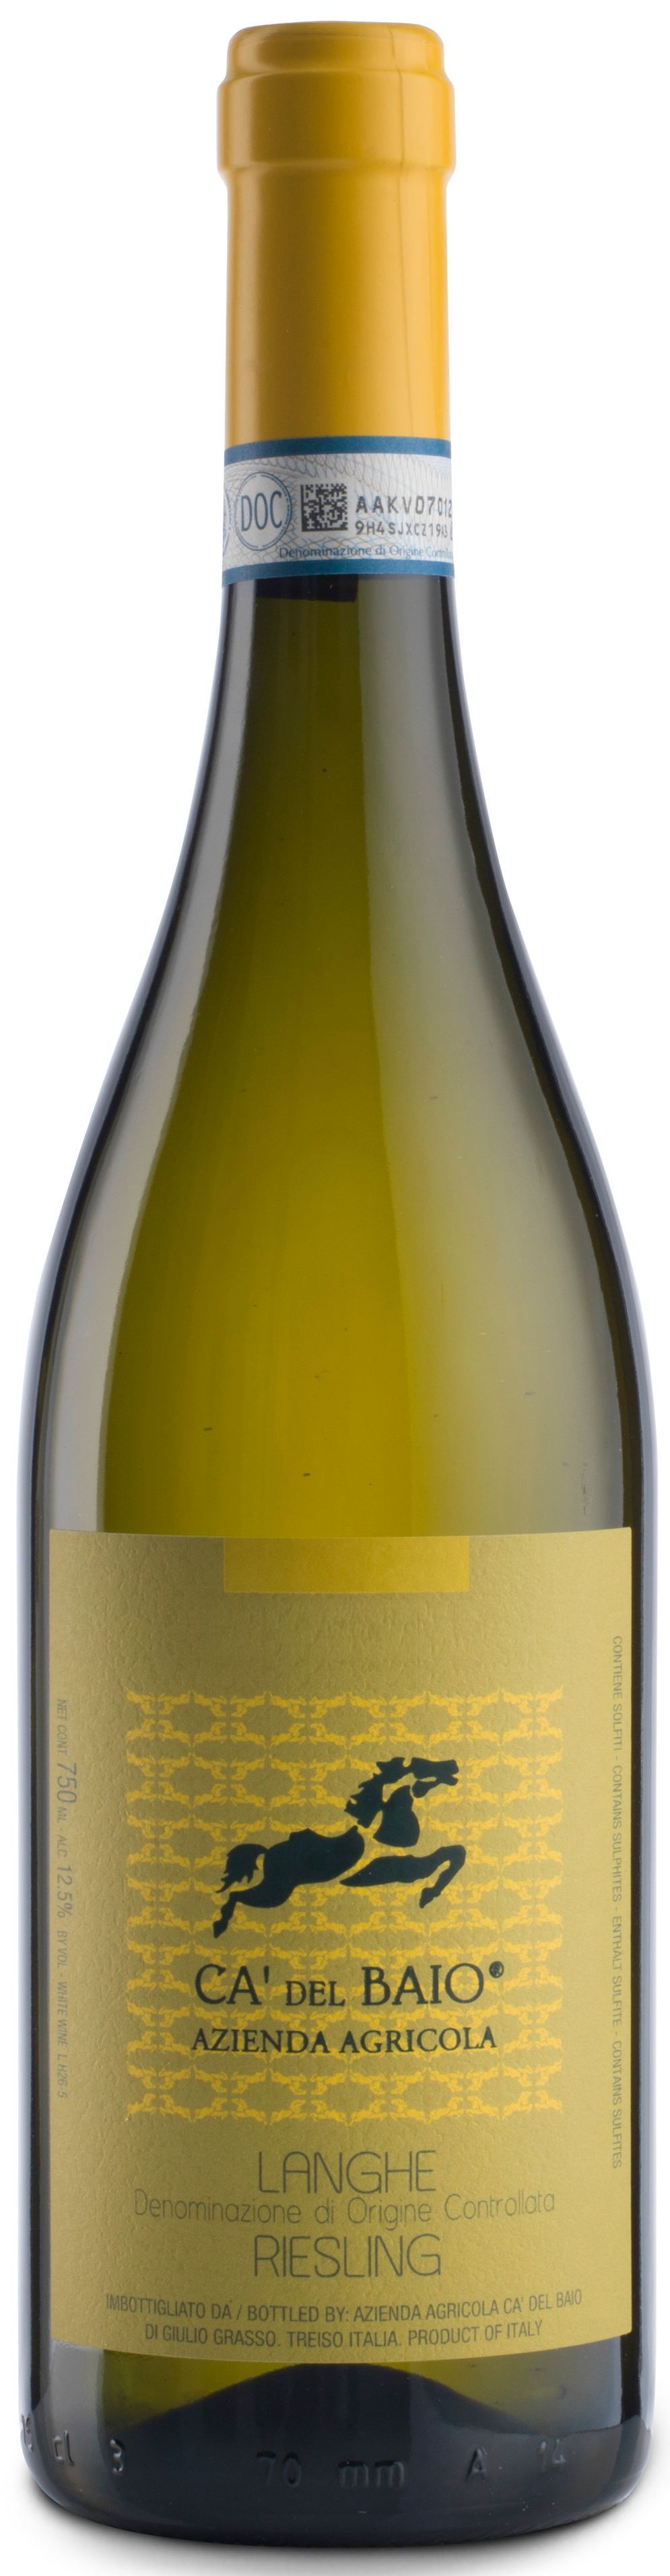 Ca' Del Baio, Langhe Riesling, 2018